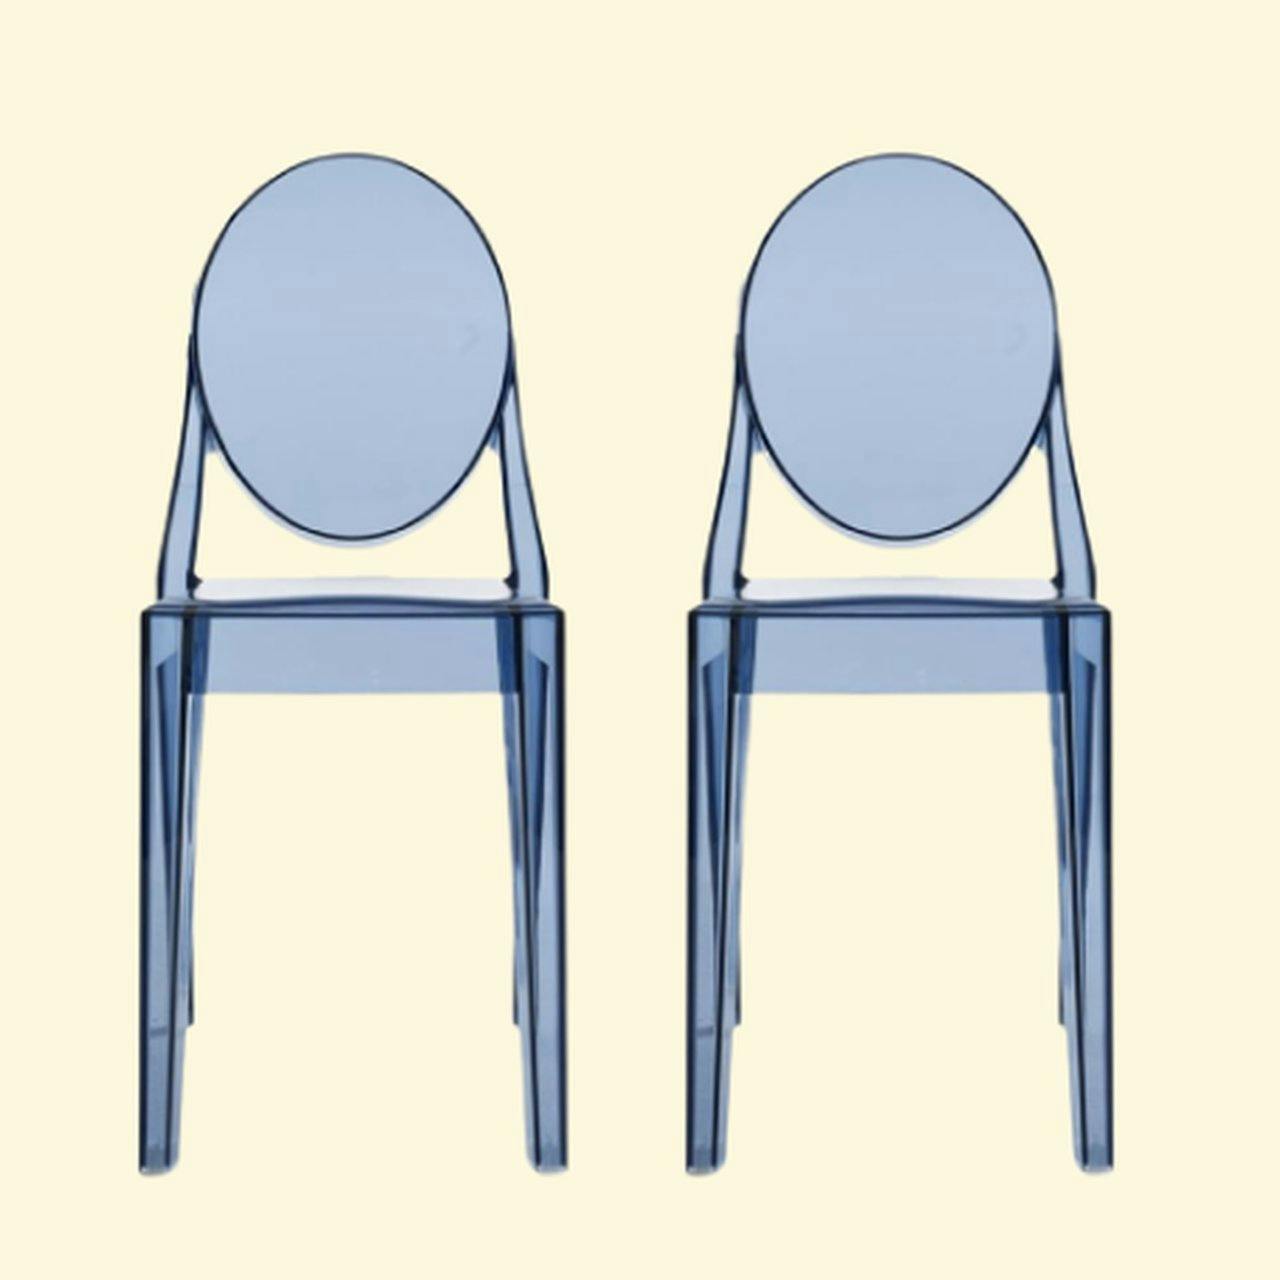 Walter Knoll Dining chairs